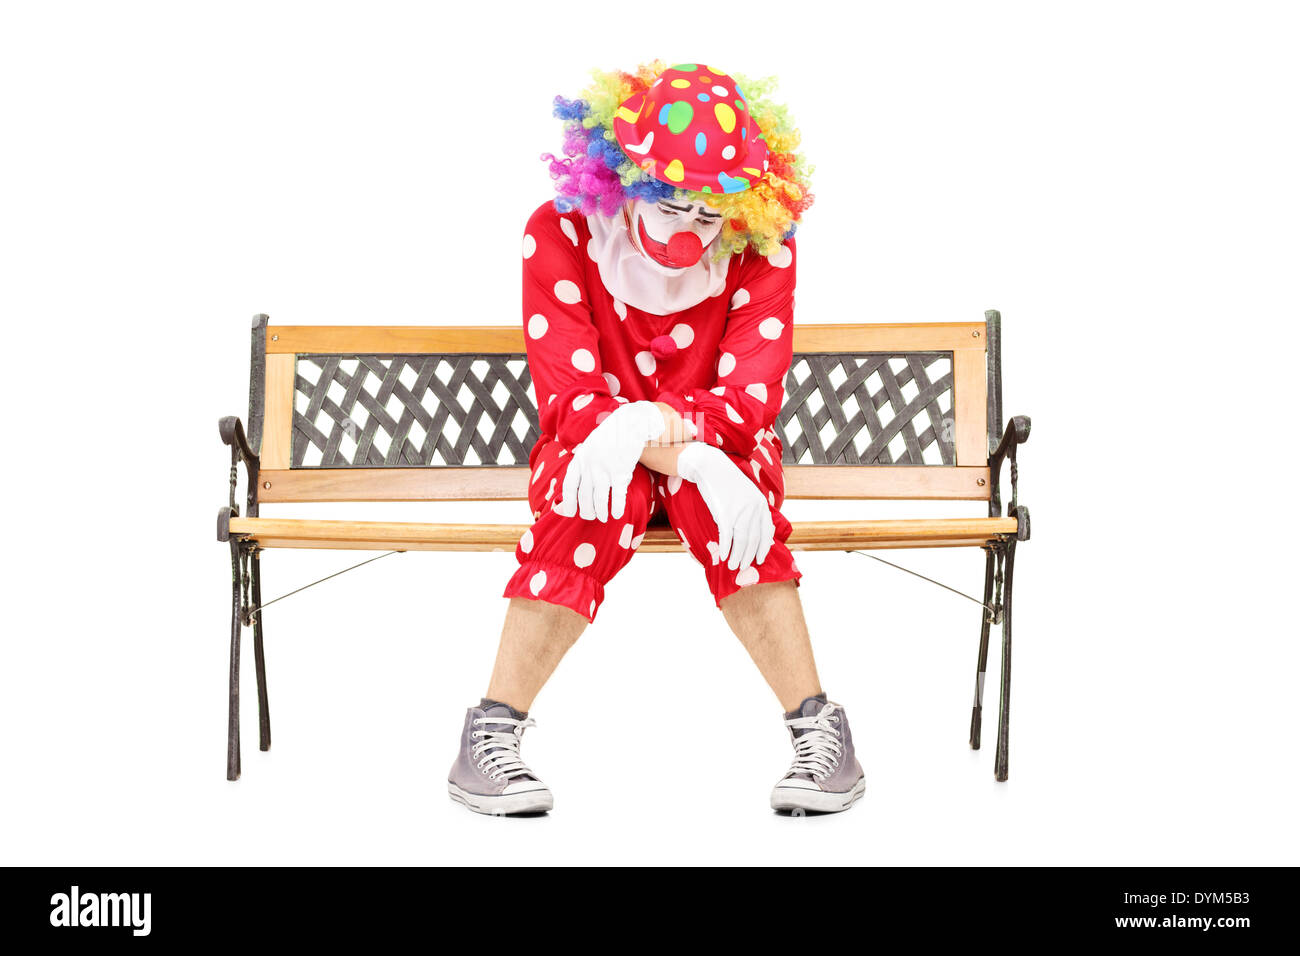 Sad clown sitting on a wooden bench Stock Photo